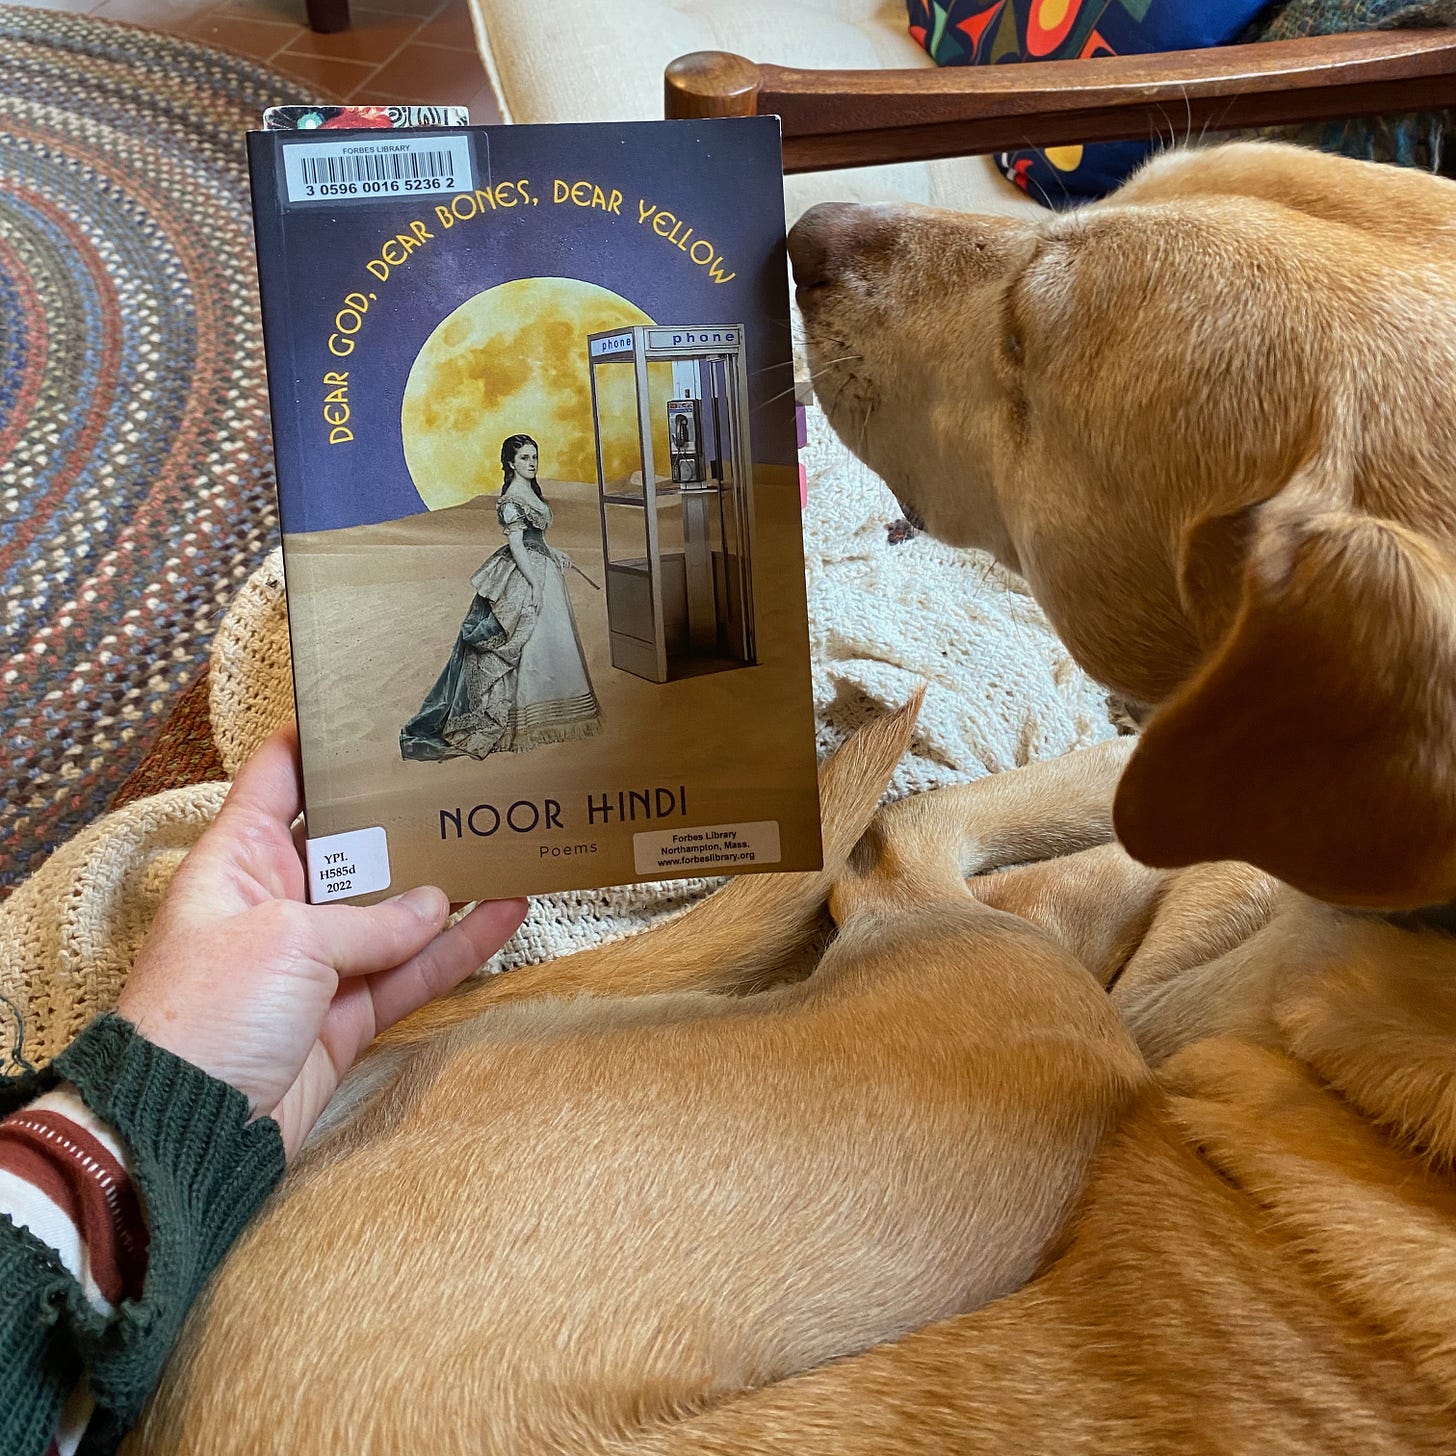 I’m holding this book next to my dog, who is curled up on a couch, her nose sniffing the title.